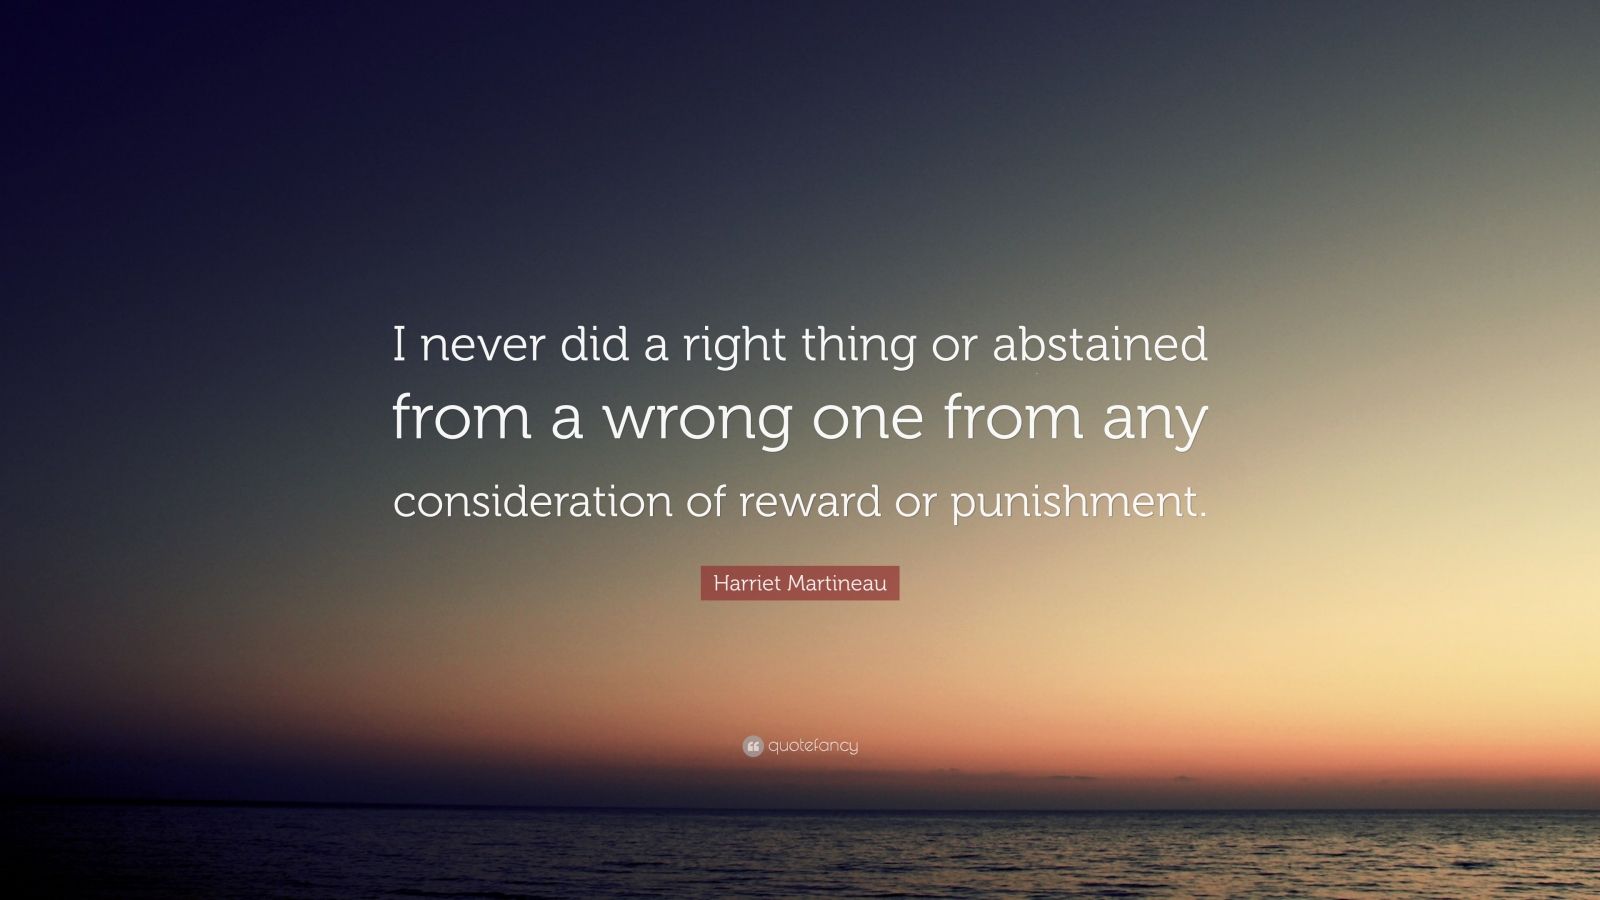 Harriet Martineau Quote: “I never did a right thing or abstained from a ...